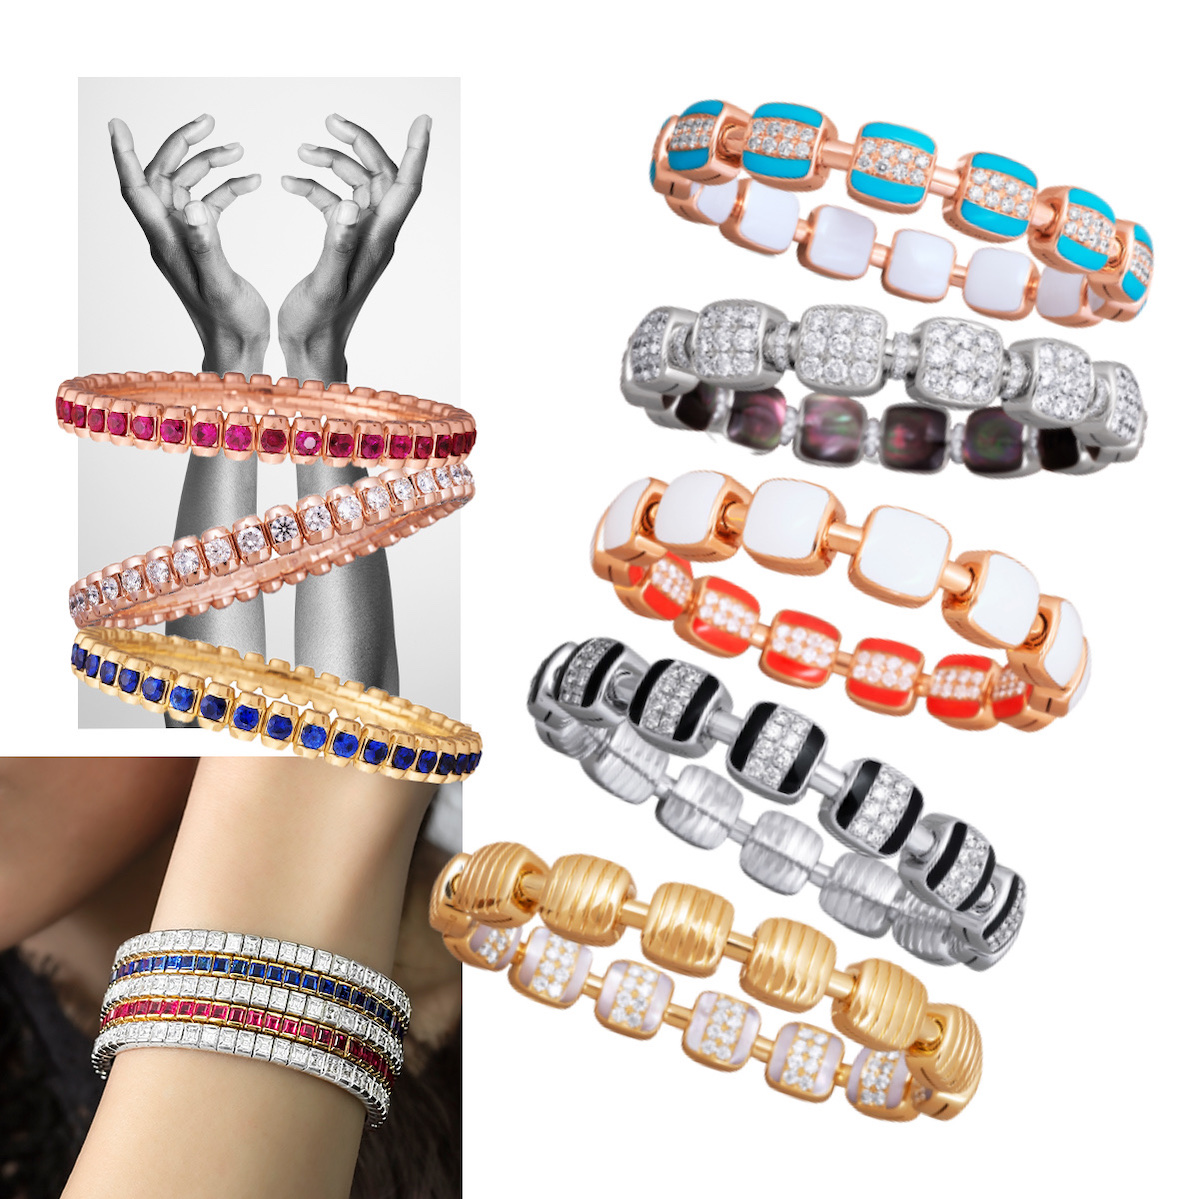 PICCHIOTTI Bullet Bracelets in Ruby, Diamond, and Sapphire, PICCHIOTTI Reversible Xpandable bracelets, model wearing PICCHIOTTI Xpandable Emerald Cut Lover bracelets in white diamonds, rubies, and sapphires